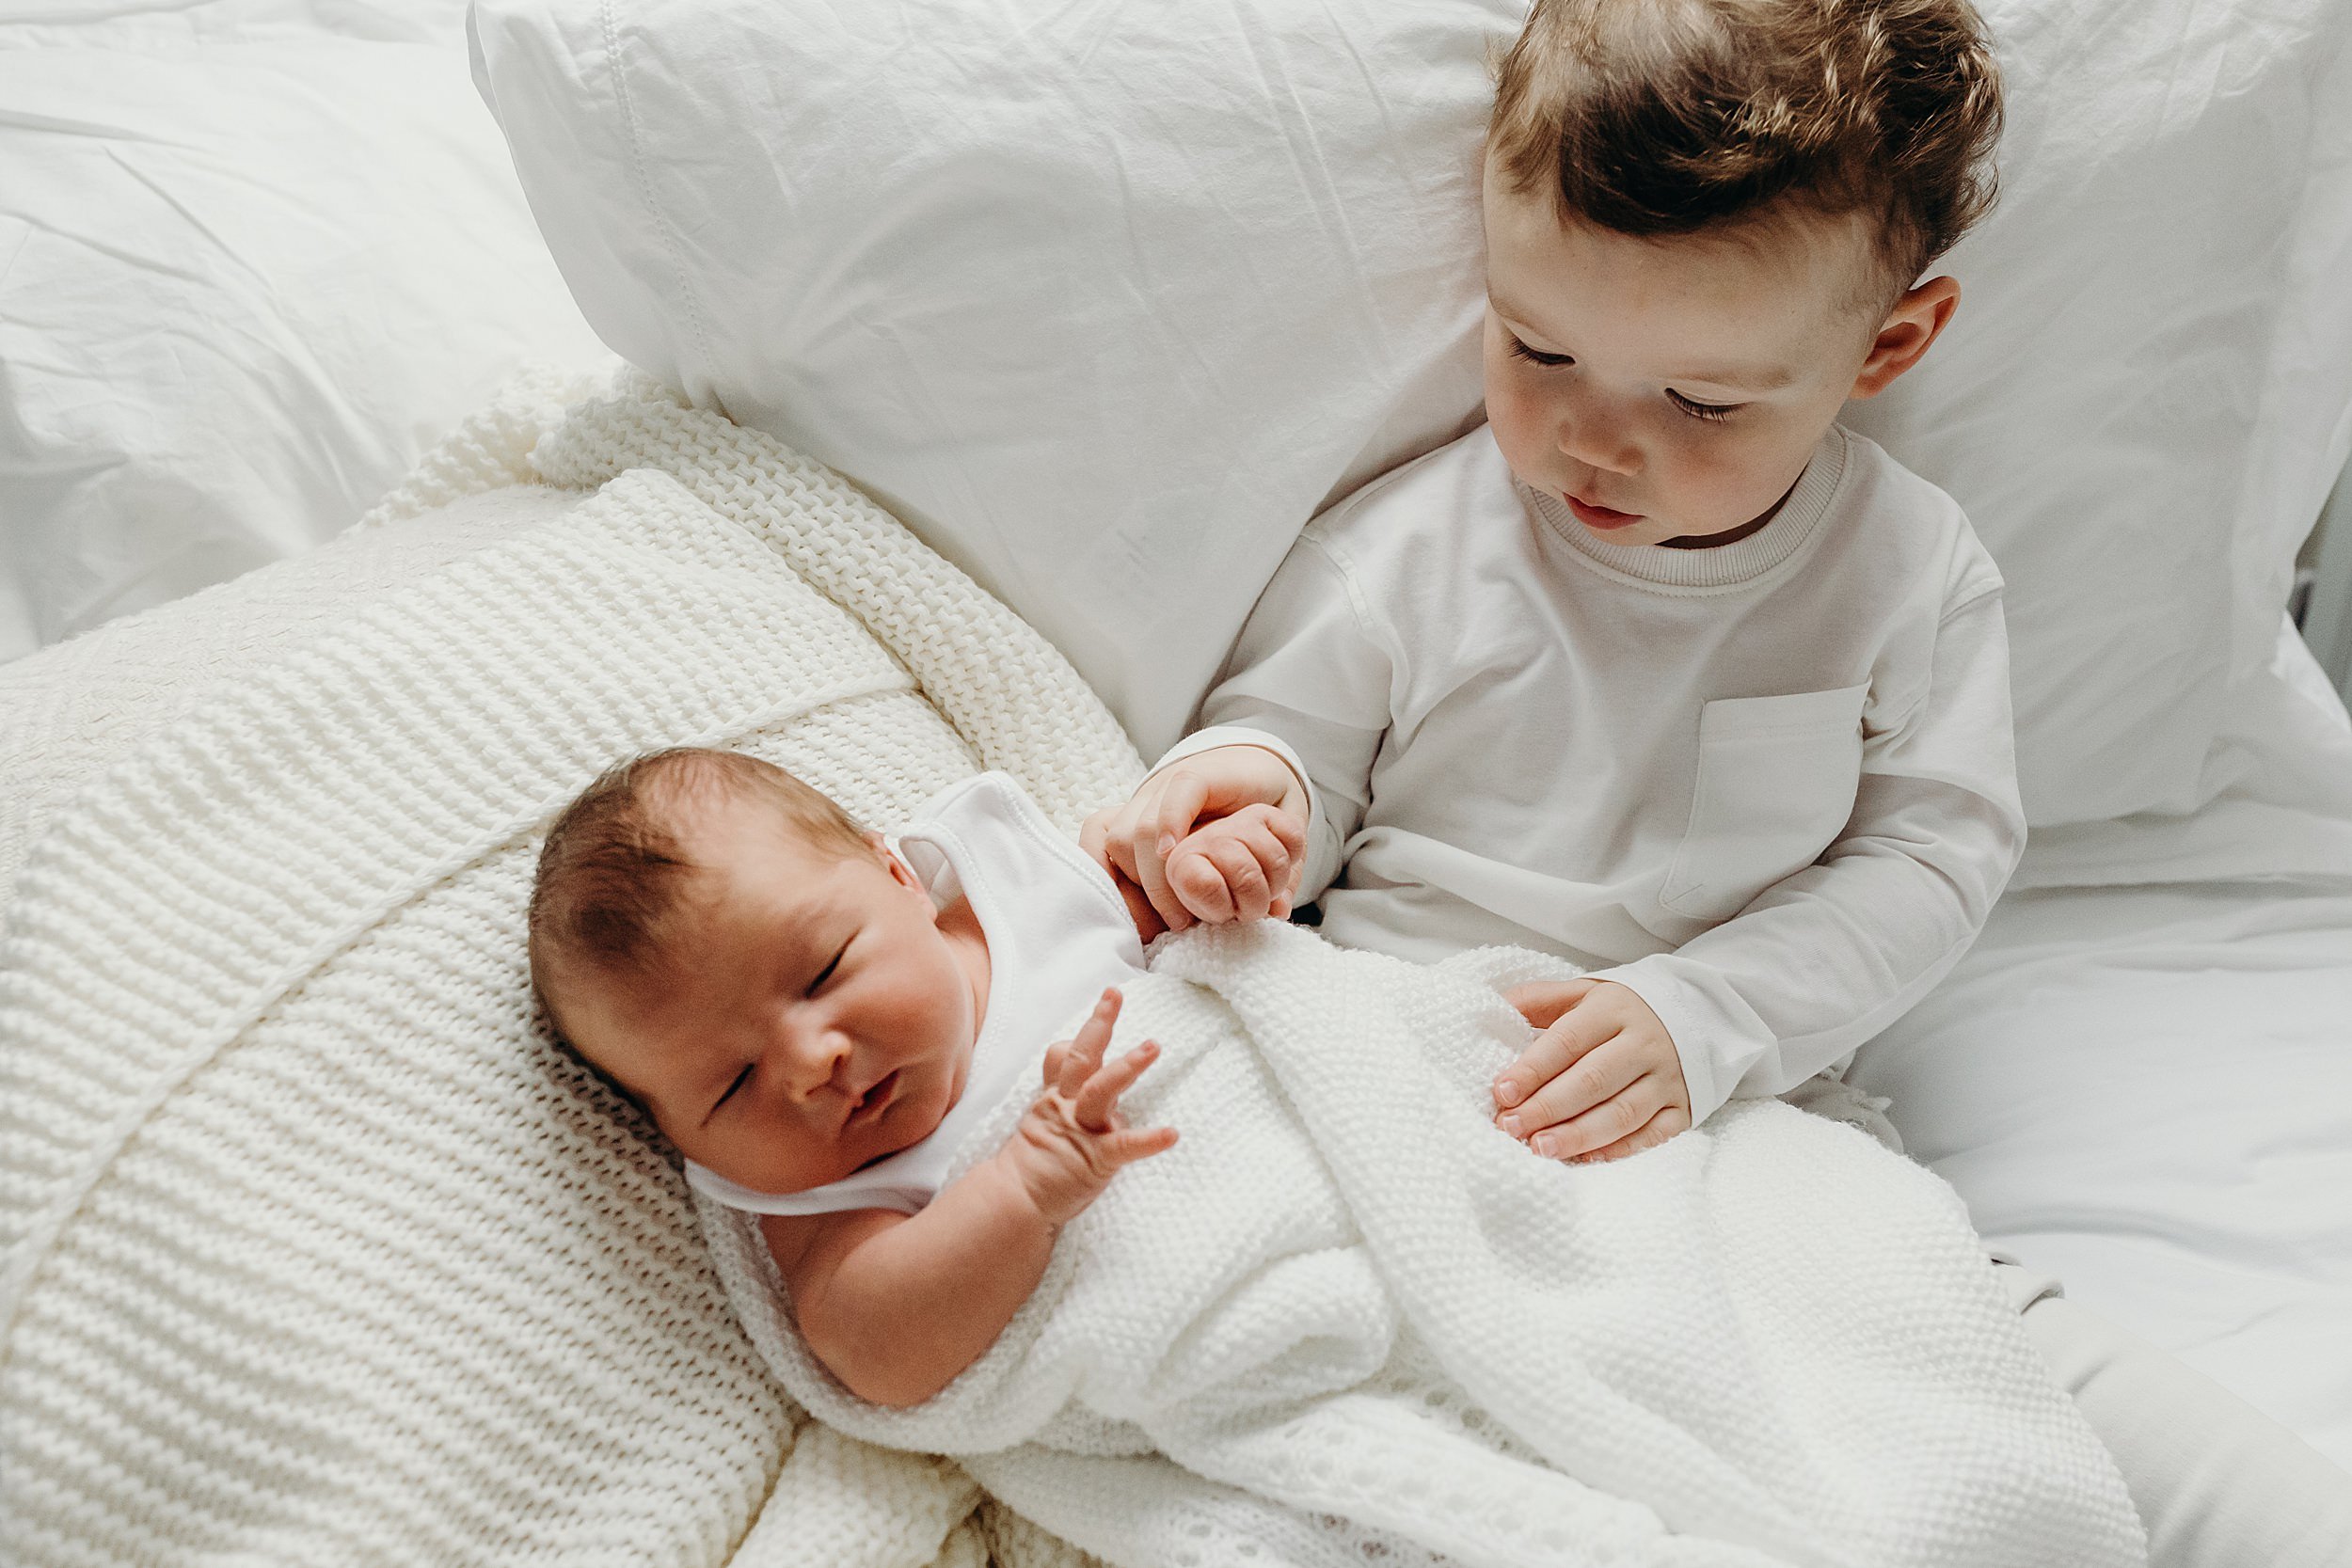 family photographer glasgow scotland captures toddler boy and baby on white blanket and pillows the toddler is holding the baby's hand